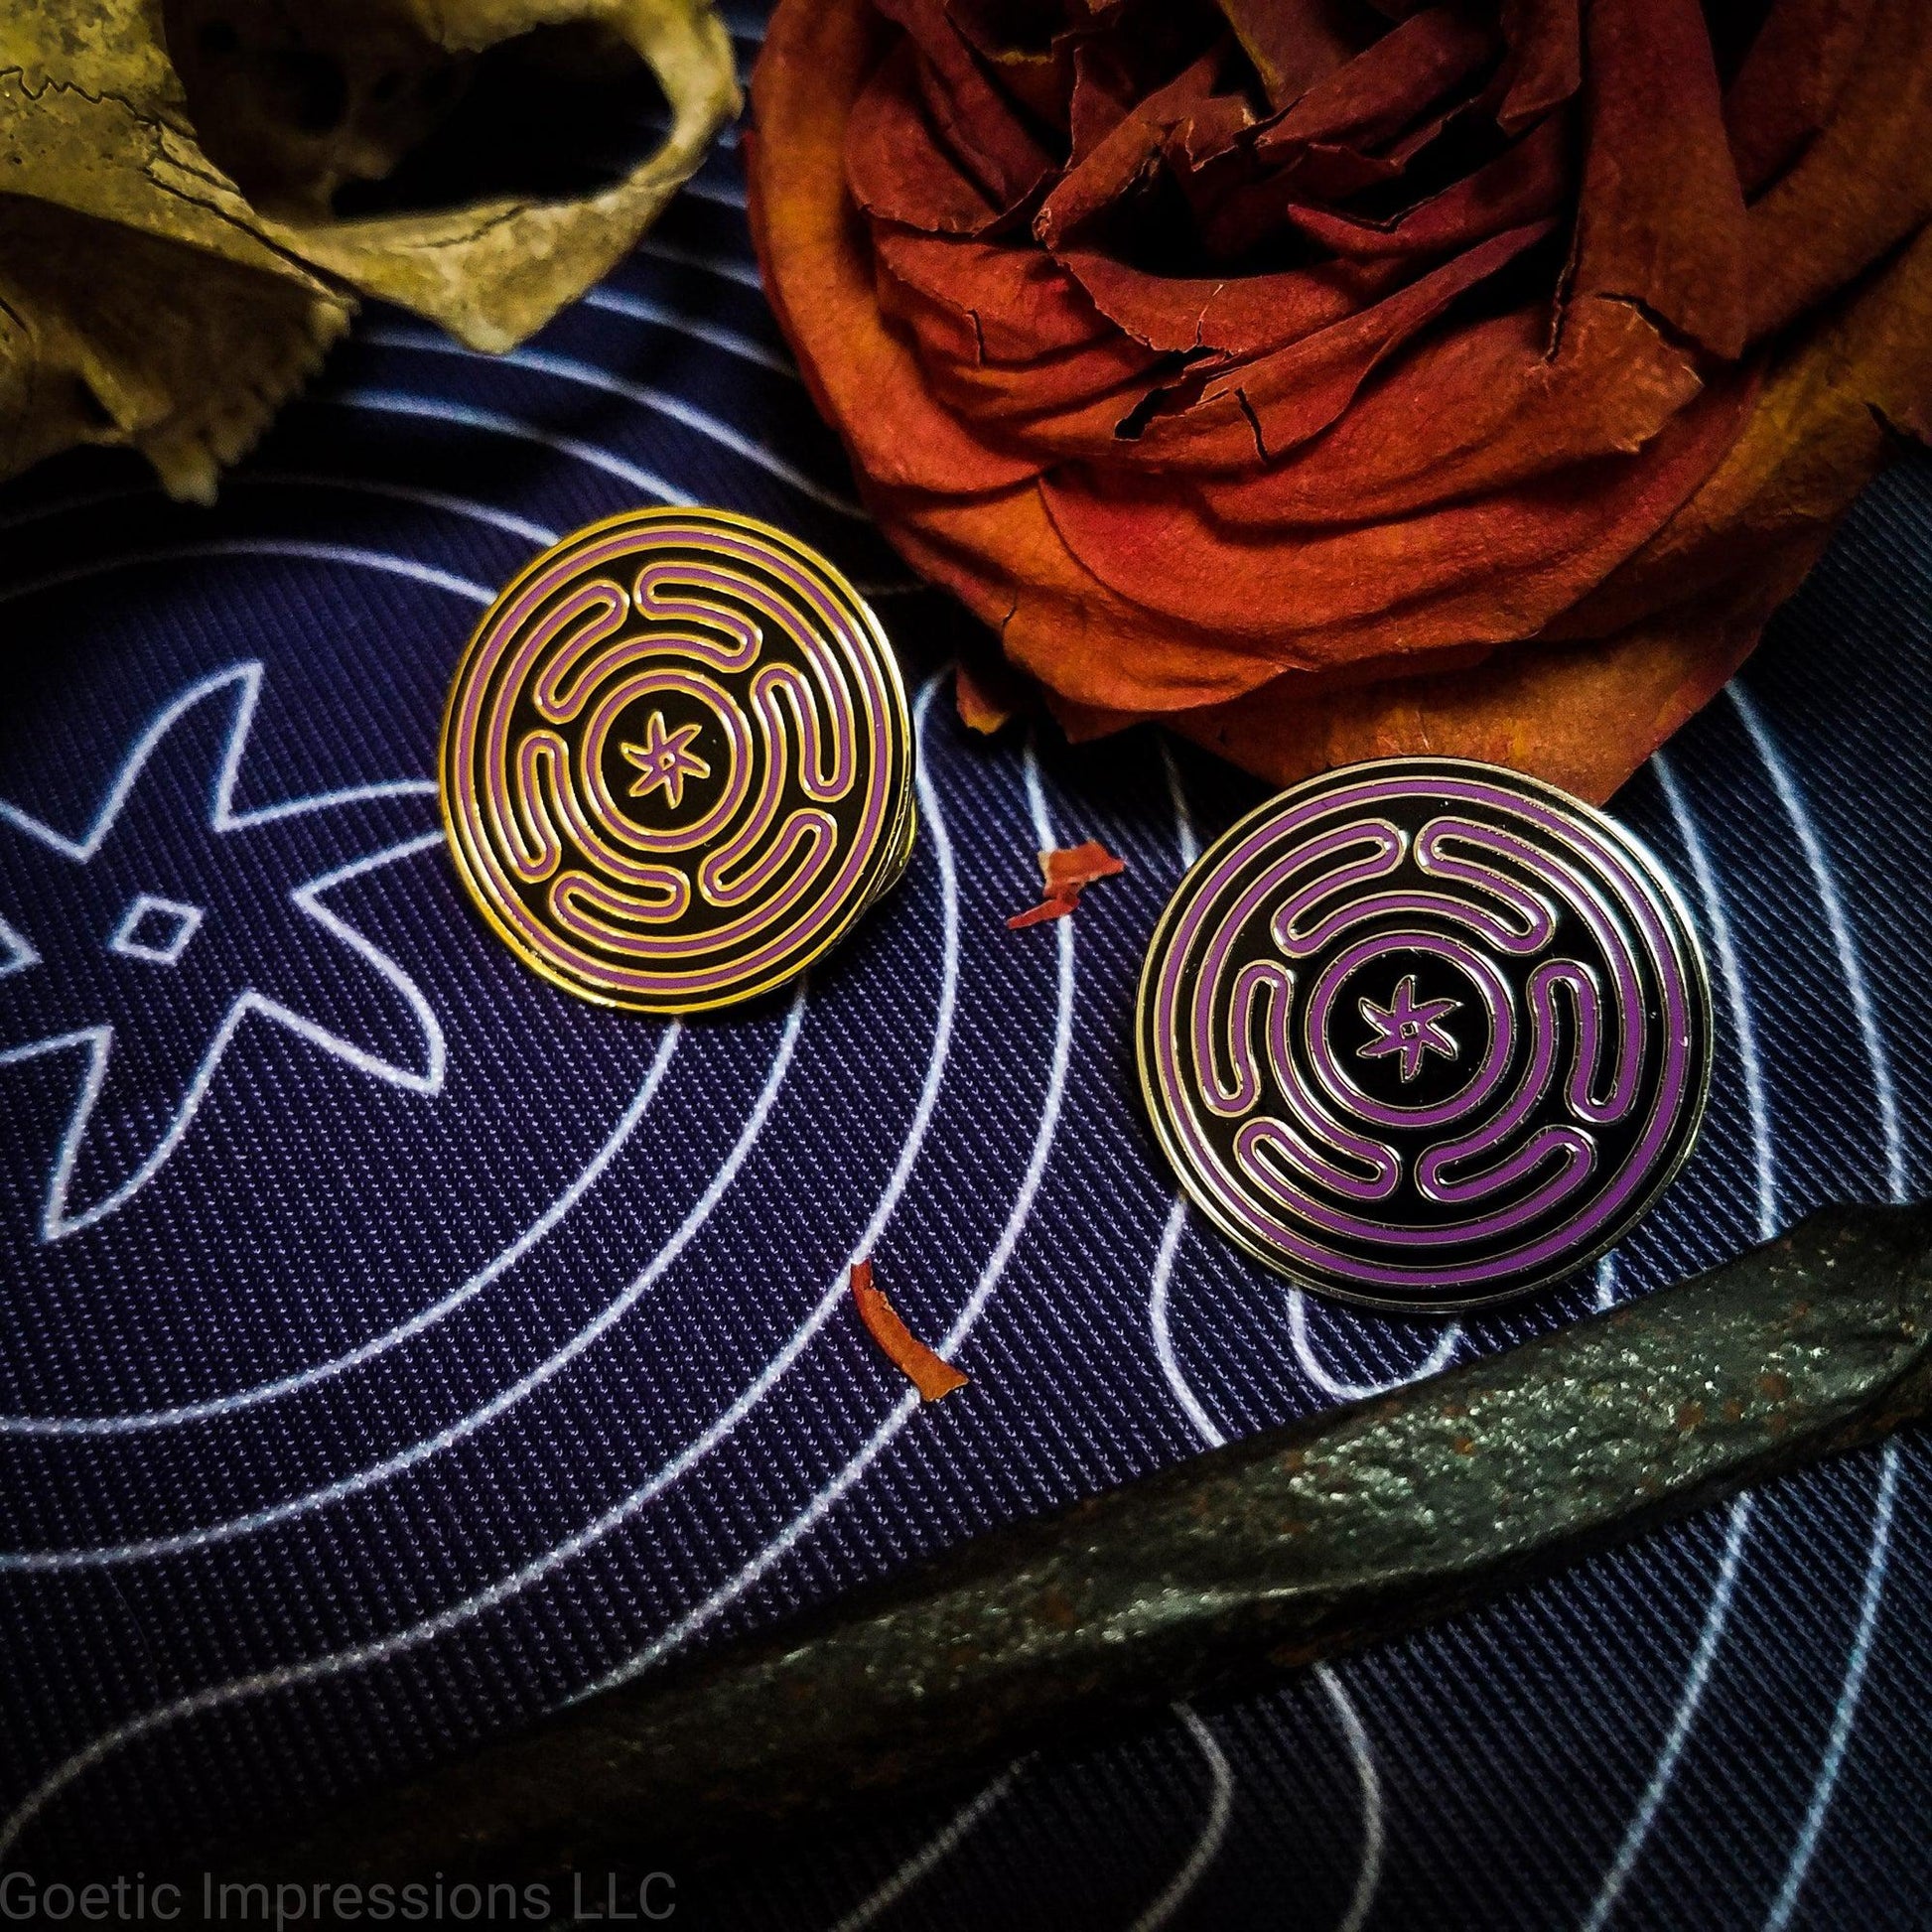 Two hard enamel pins featuring the Strophlos or Wheel of Hecate sigil. The sigil itself is colored in purple on a black background. The pins come in silver or gold plating. The pins are on an altar cloth with the same sigil surrounded by ritual tools.